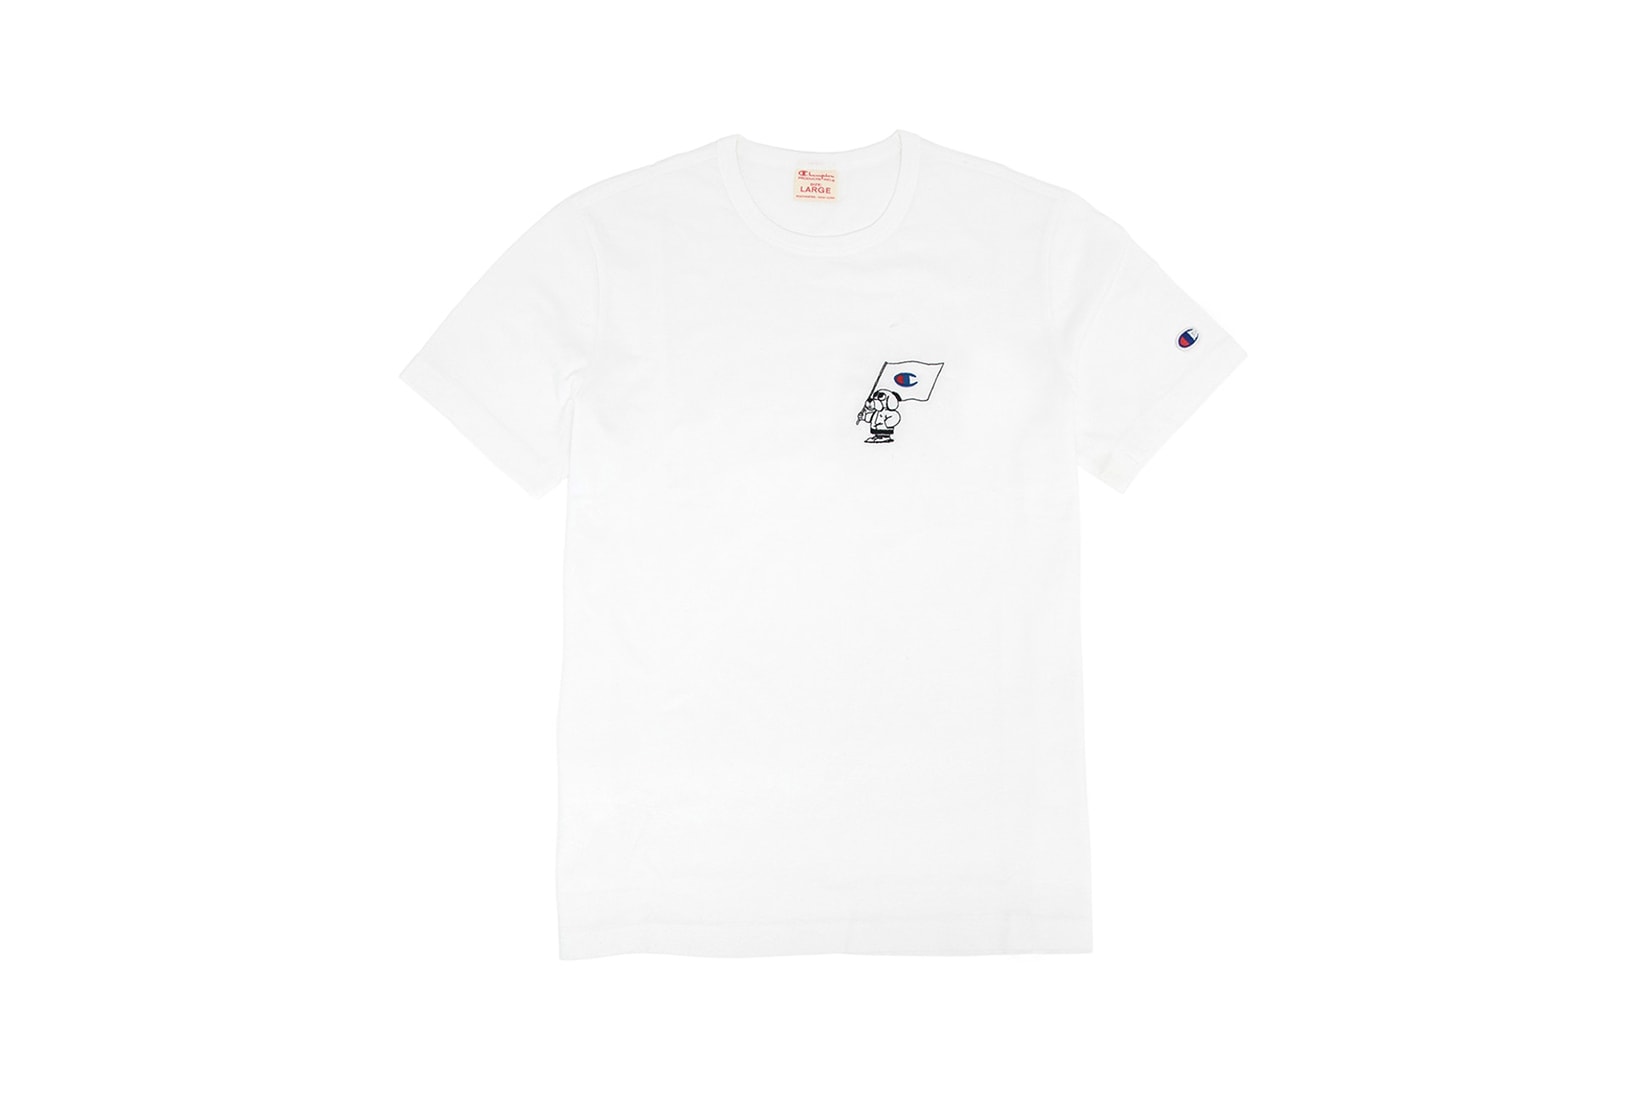 BEAMS x Champion Artist Series Collection